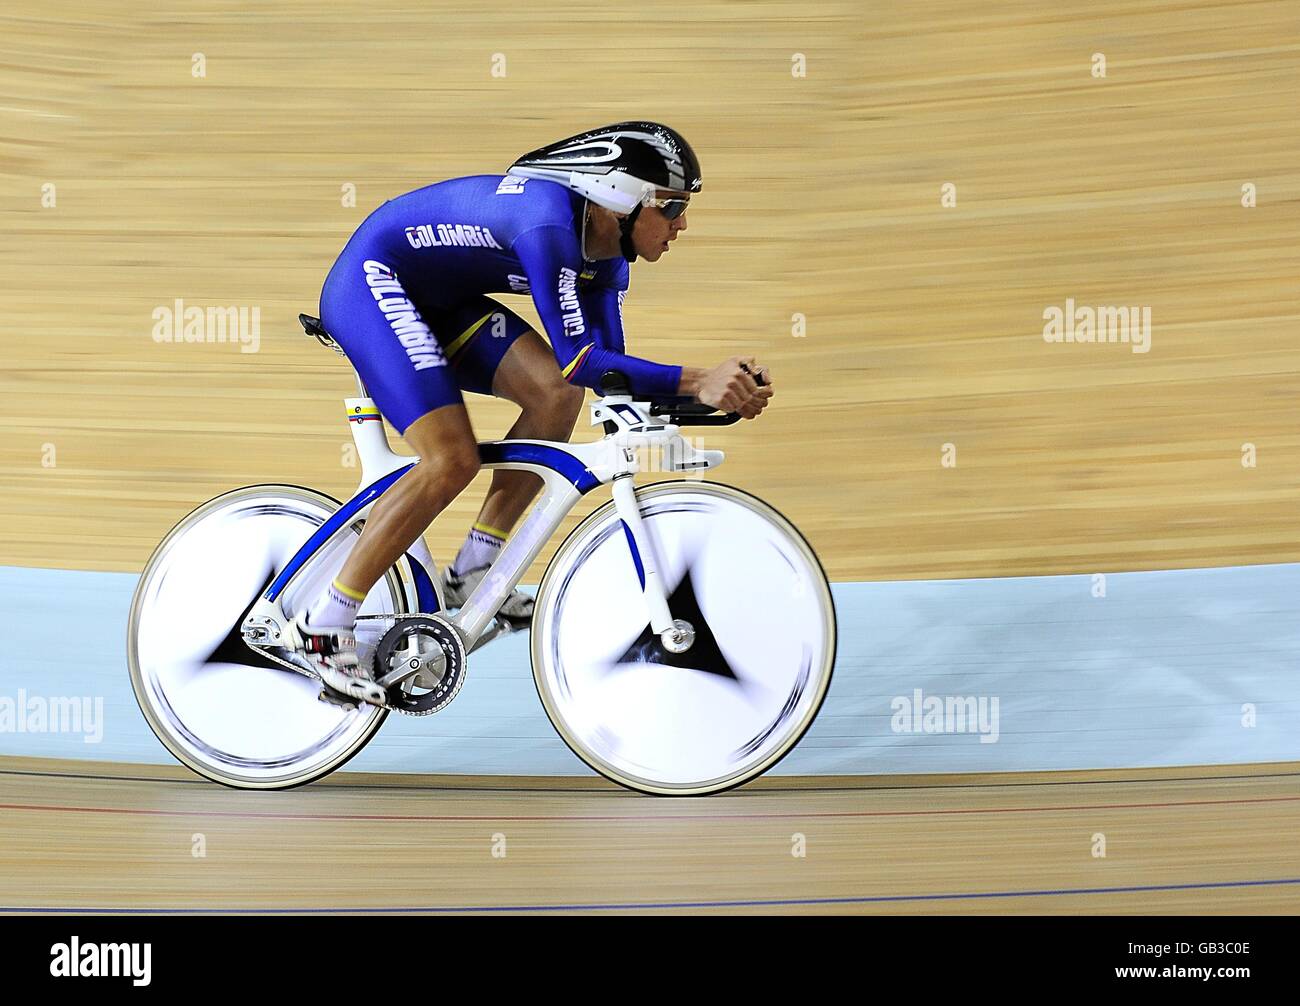 Columbia's Carlos Alzate competes in the Men's Individual Pursuit Qualifying at the Laoshan Velodrome on day 7 of the 2008 Olympic Games in Beijing. Stock Photo